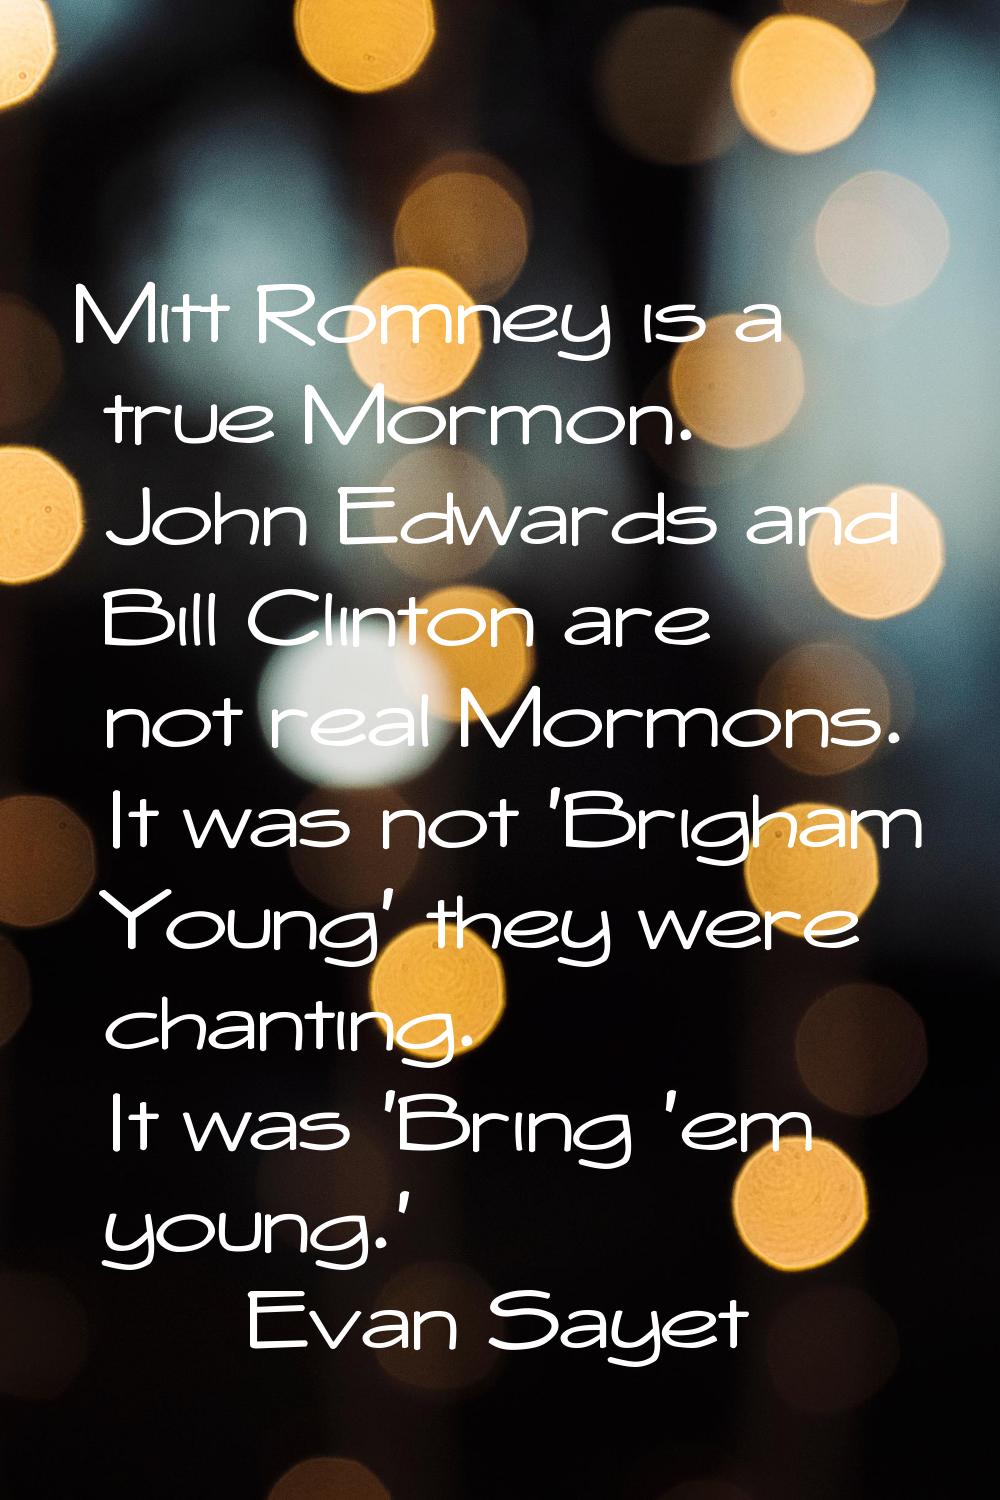 Mitt Romney is a true Mormon. John Edwards and Bill Clinton are not real Mormons. It was not 'Brigh